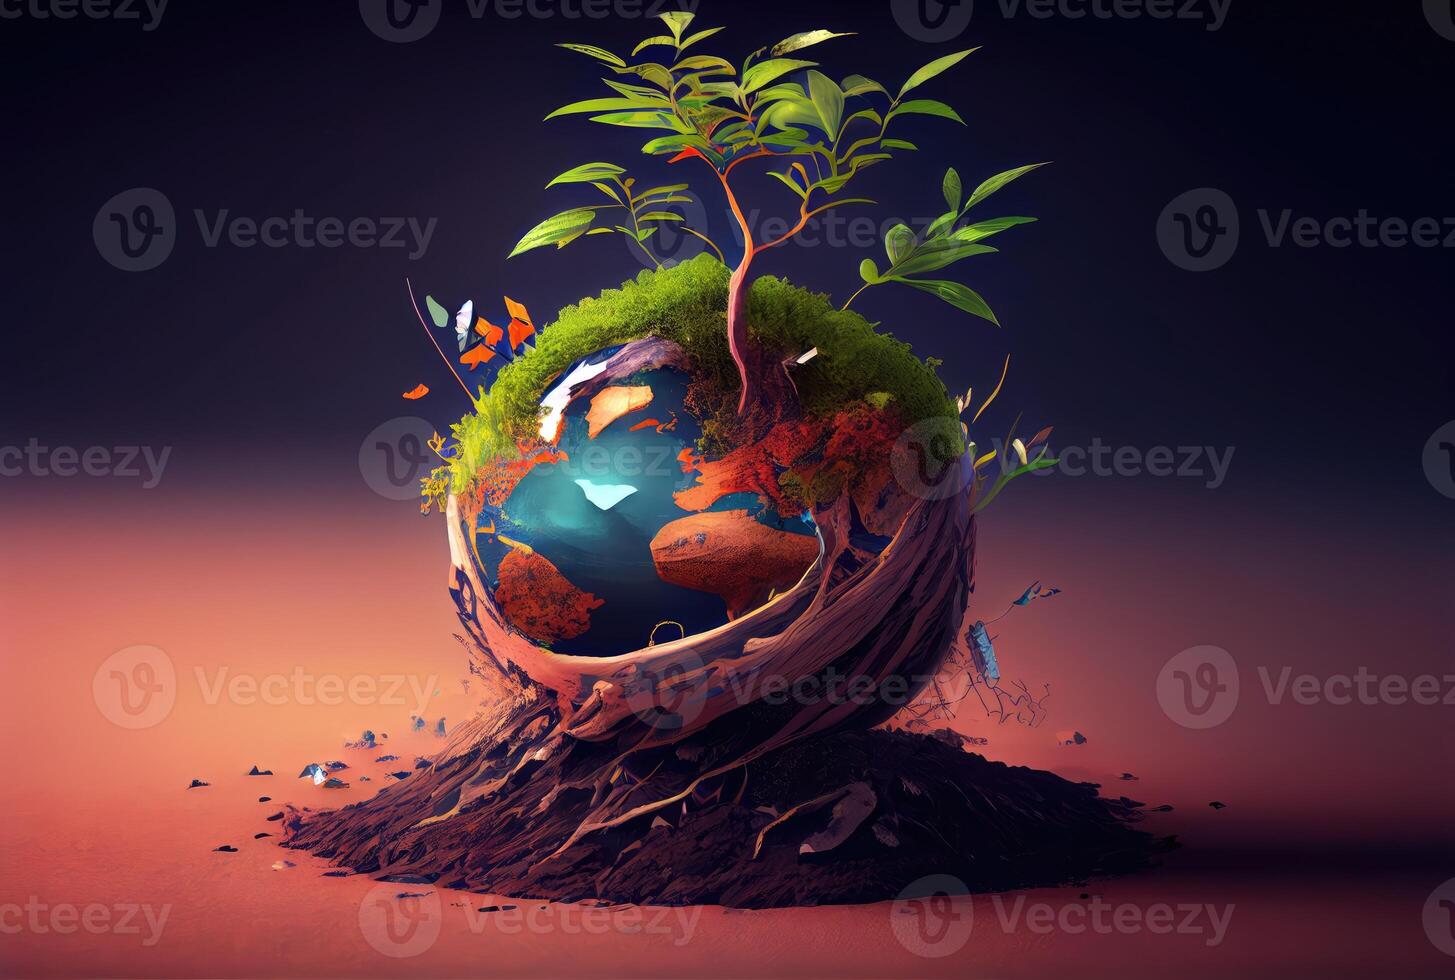 Beautiful Blue globe on the ground with decorating in summer season background. Beauty in nature and World Earth Day concept. photo